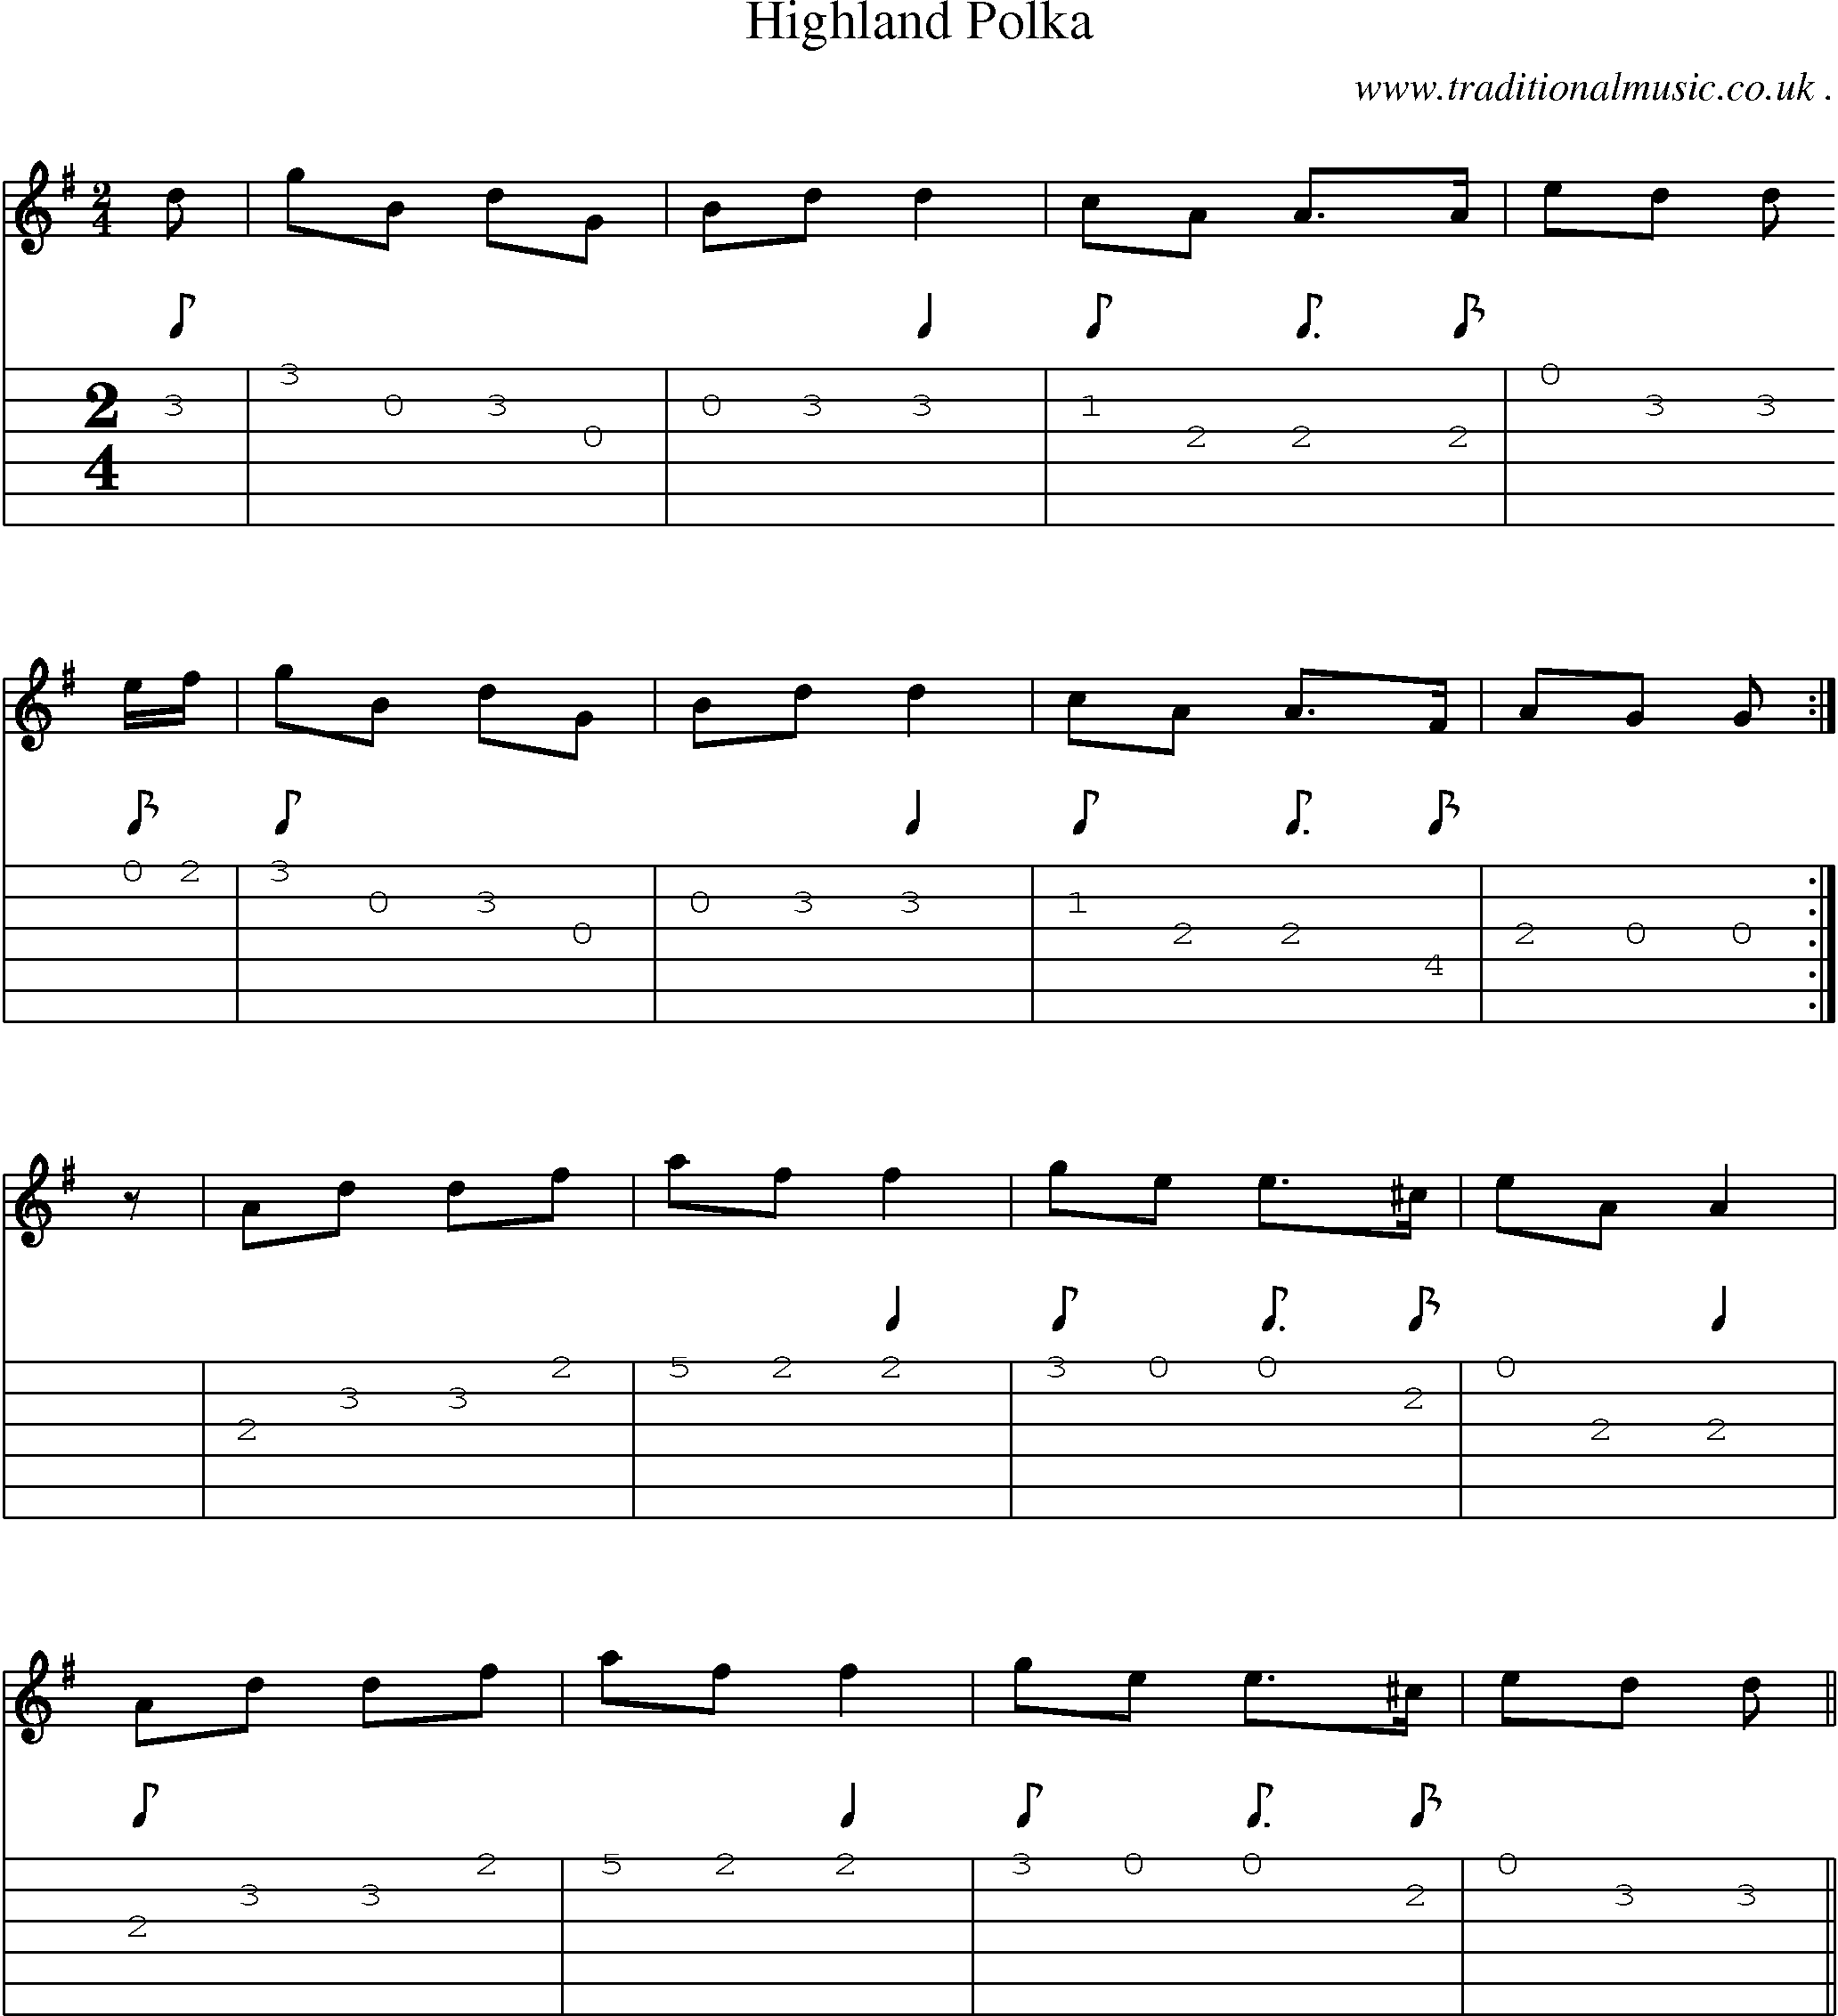 Sheet-music  score, Chords and Guitar Tabs for Highland Polka